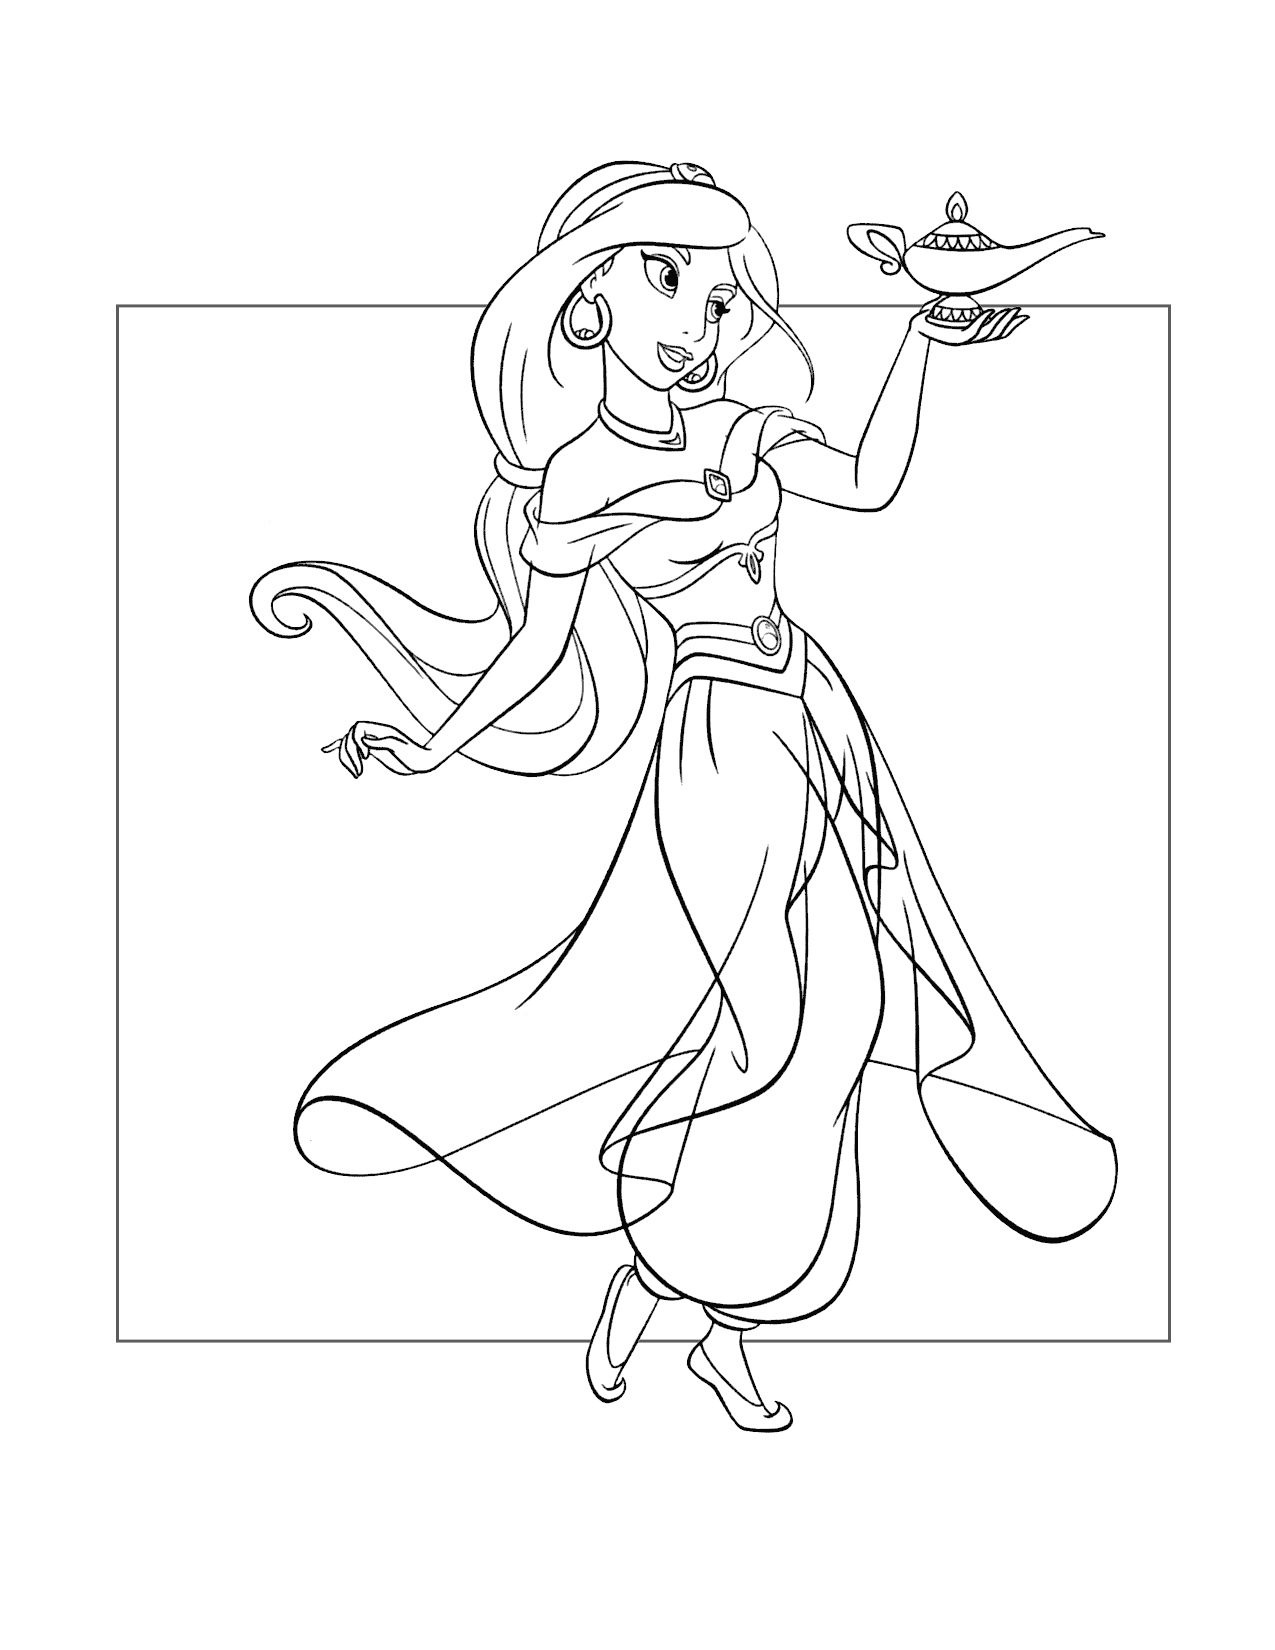 Jasmine Has The Lamp Coloring Page